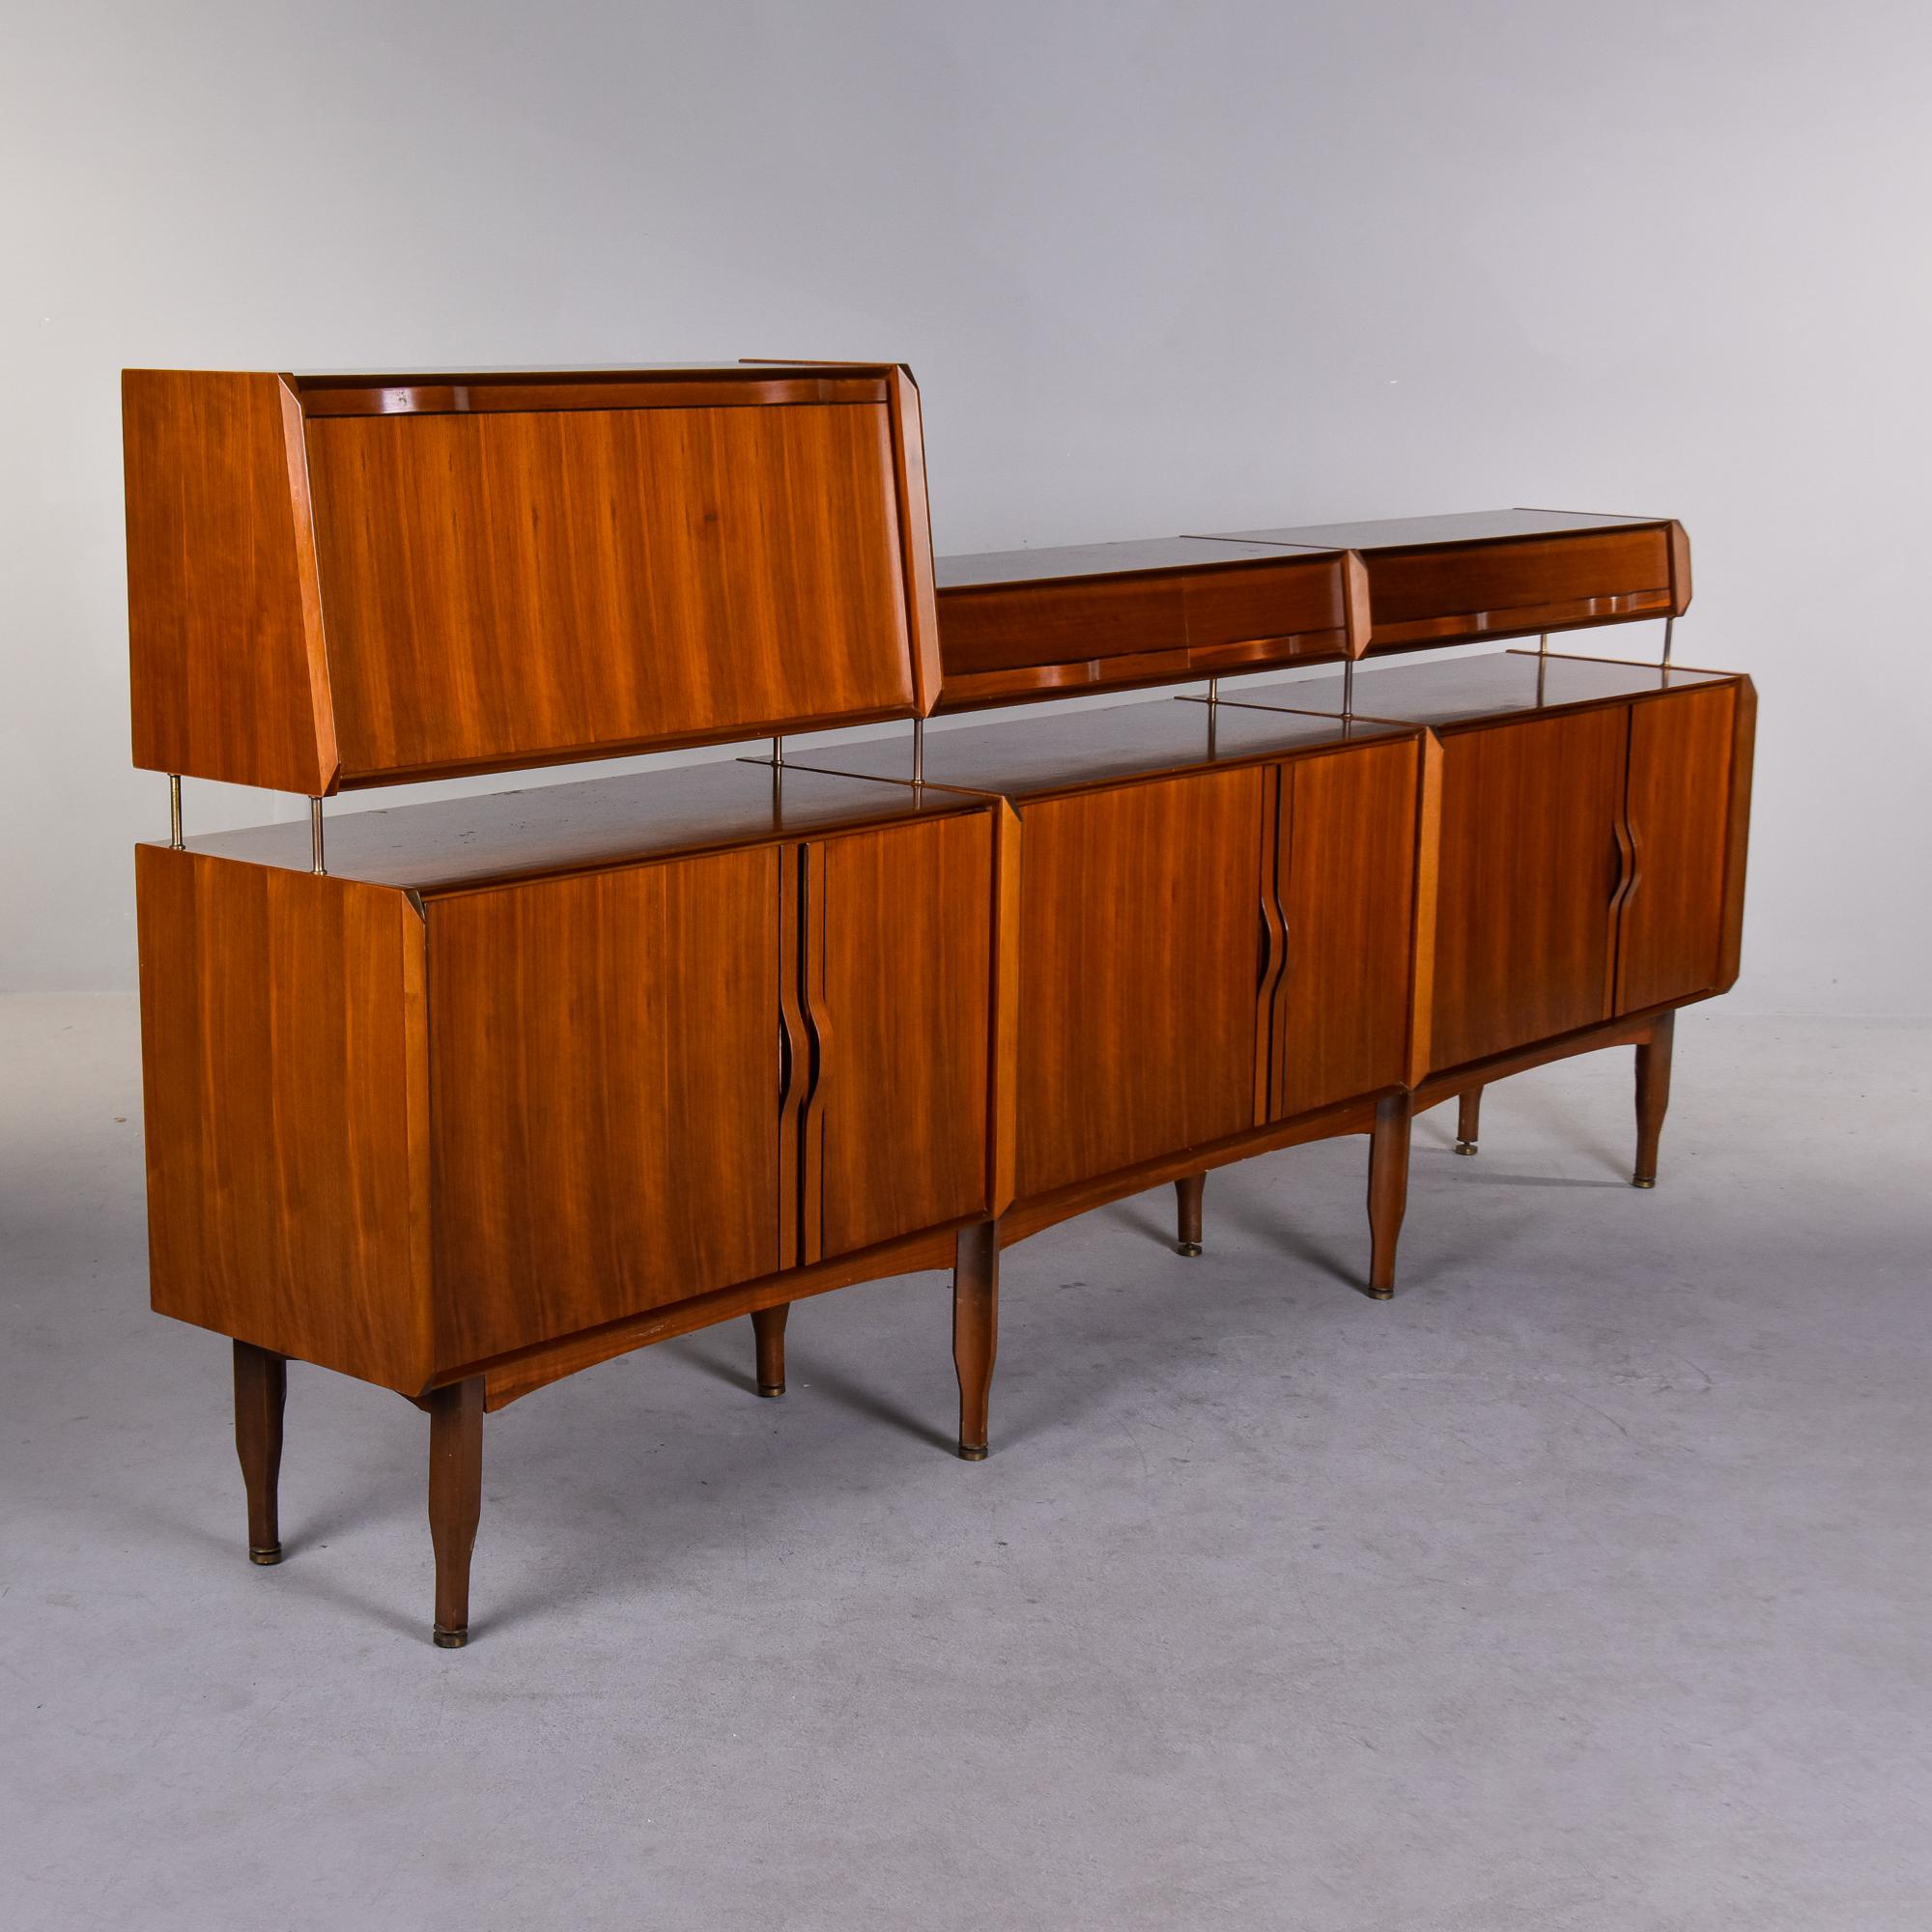 Found in Italy, this circa 1960s teak sideboard is attributed to Gianfranco Frattini. Unusual two tier design with the tallest section consisting of a cabinet with a fold down door and single interior glass shelf. The lower part of the top tier